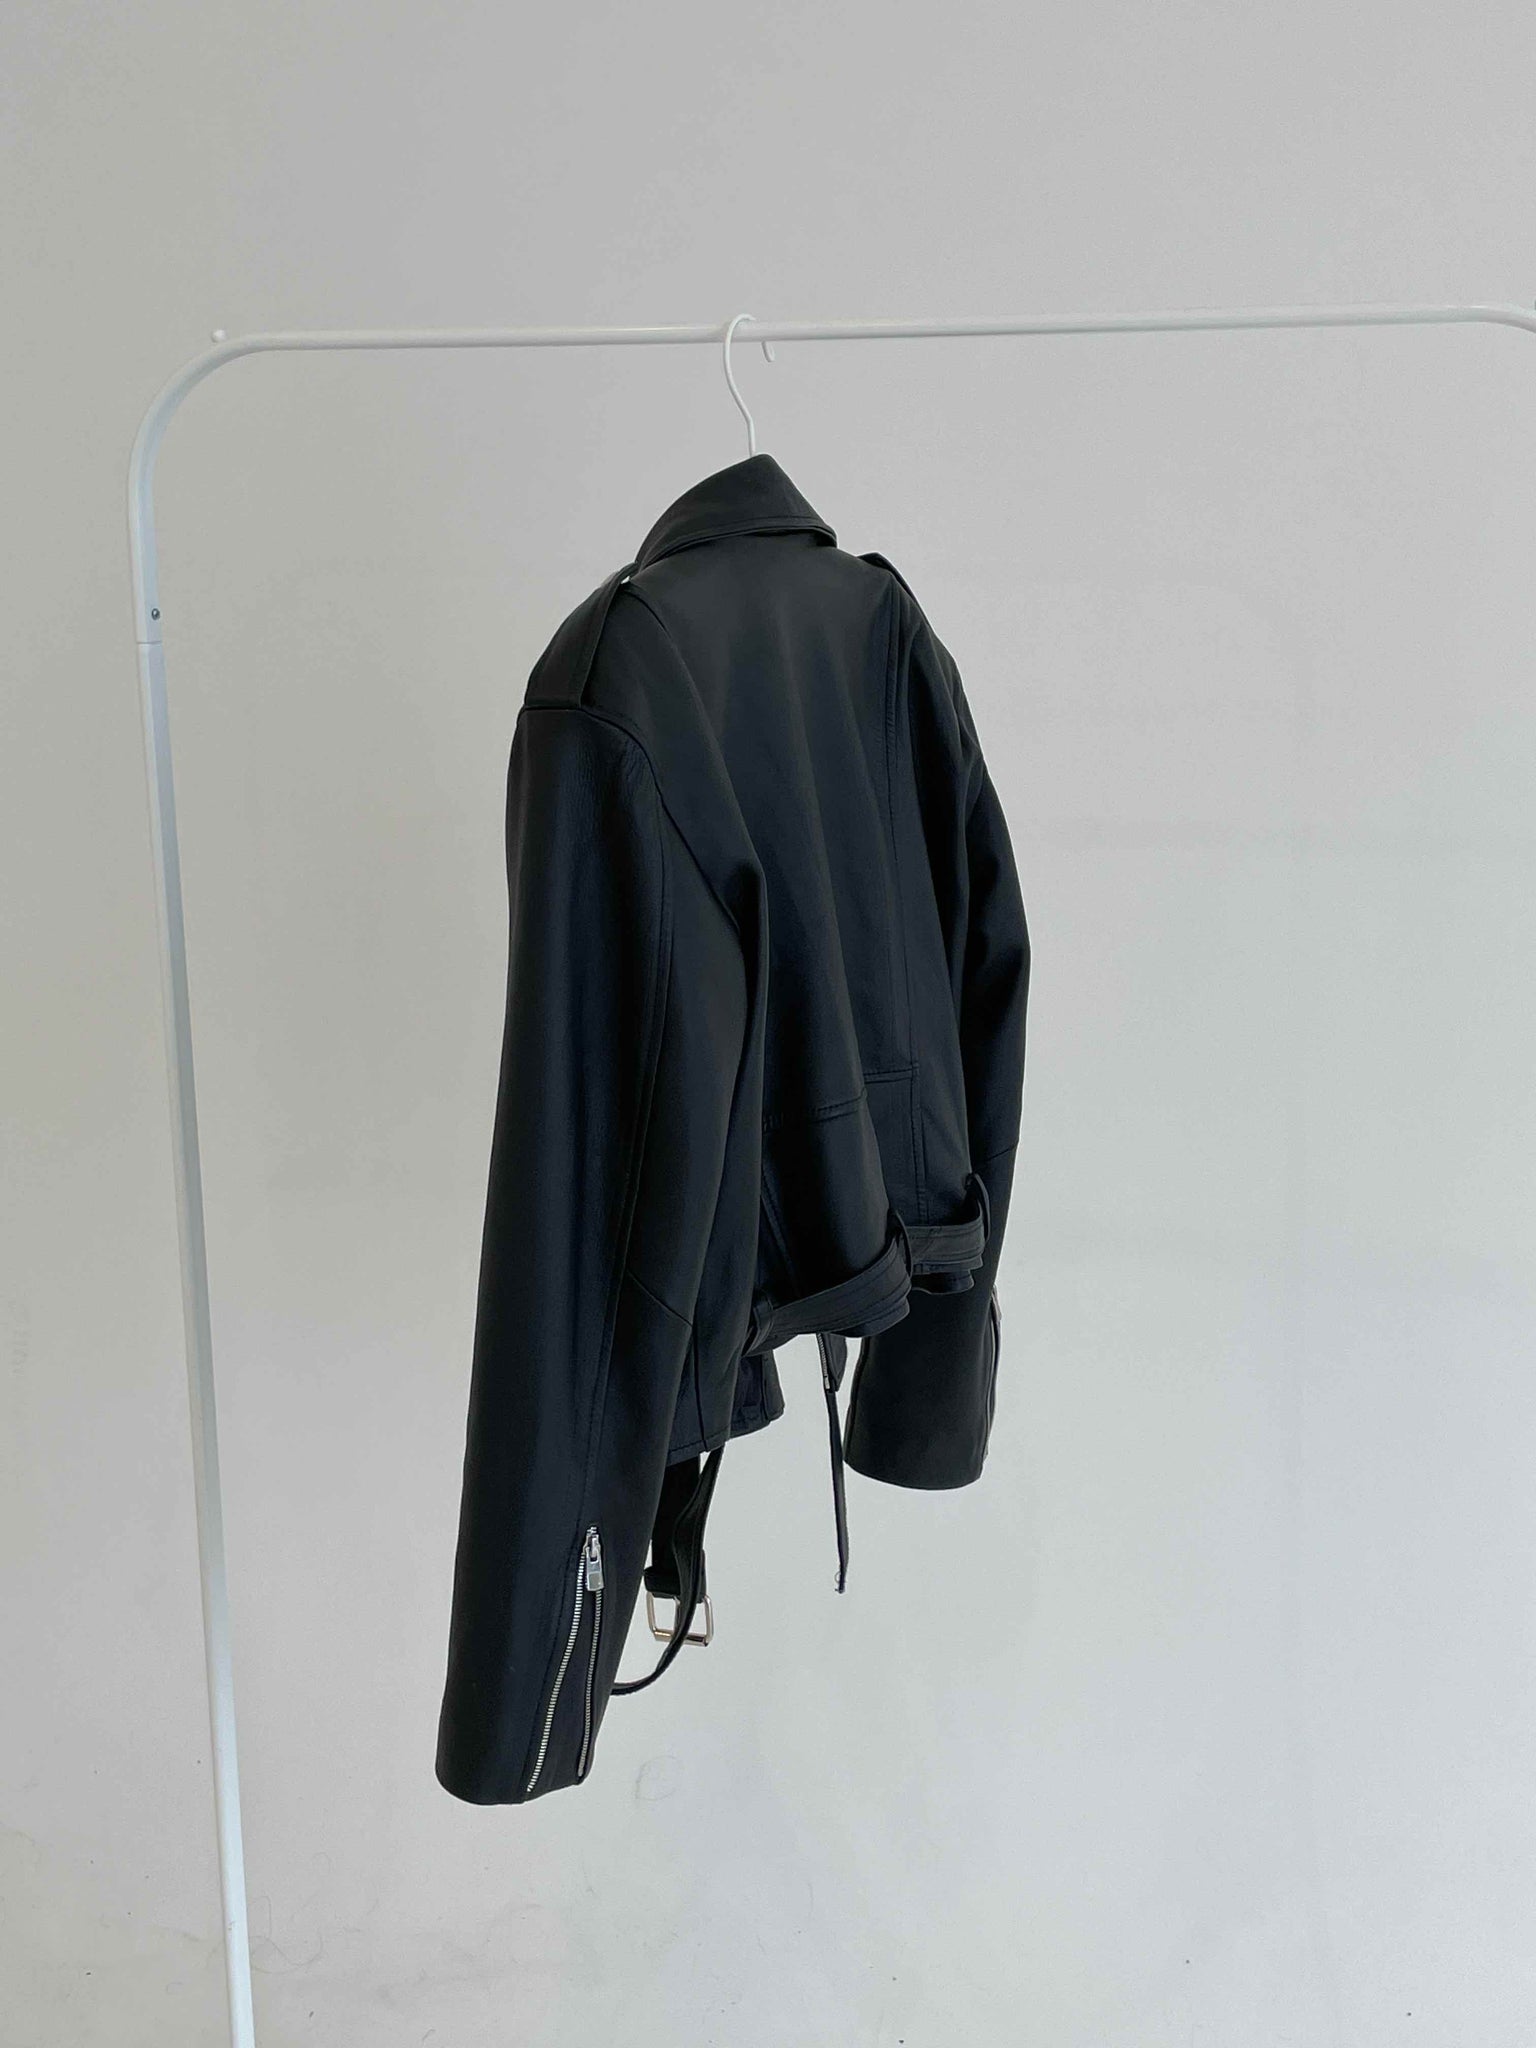 BASIC LEATHER JACKET in BLACK WITH REMOVABLE SHERPA COLLAR